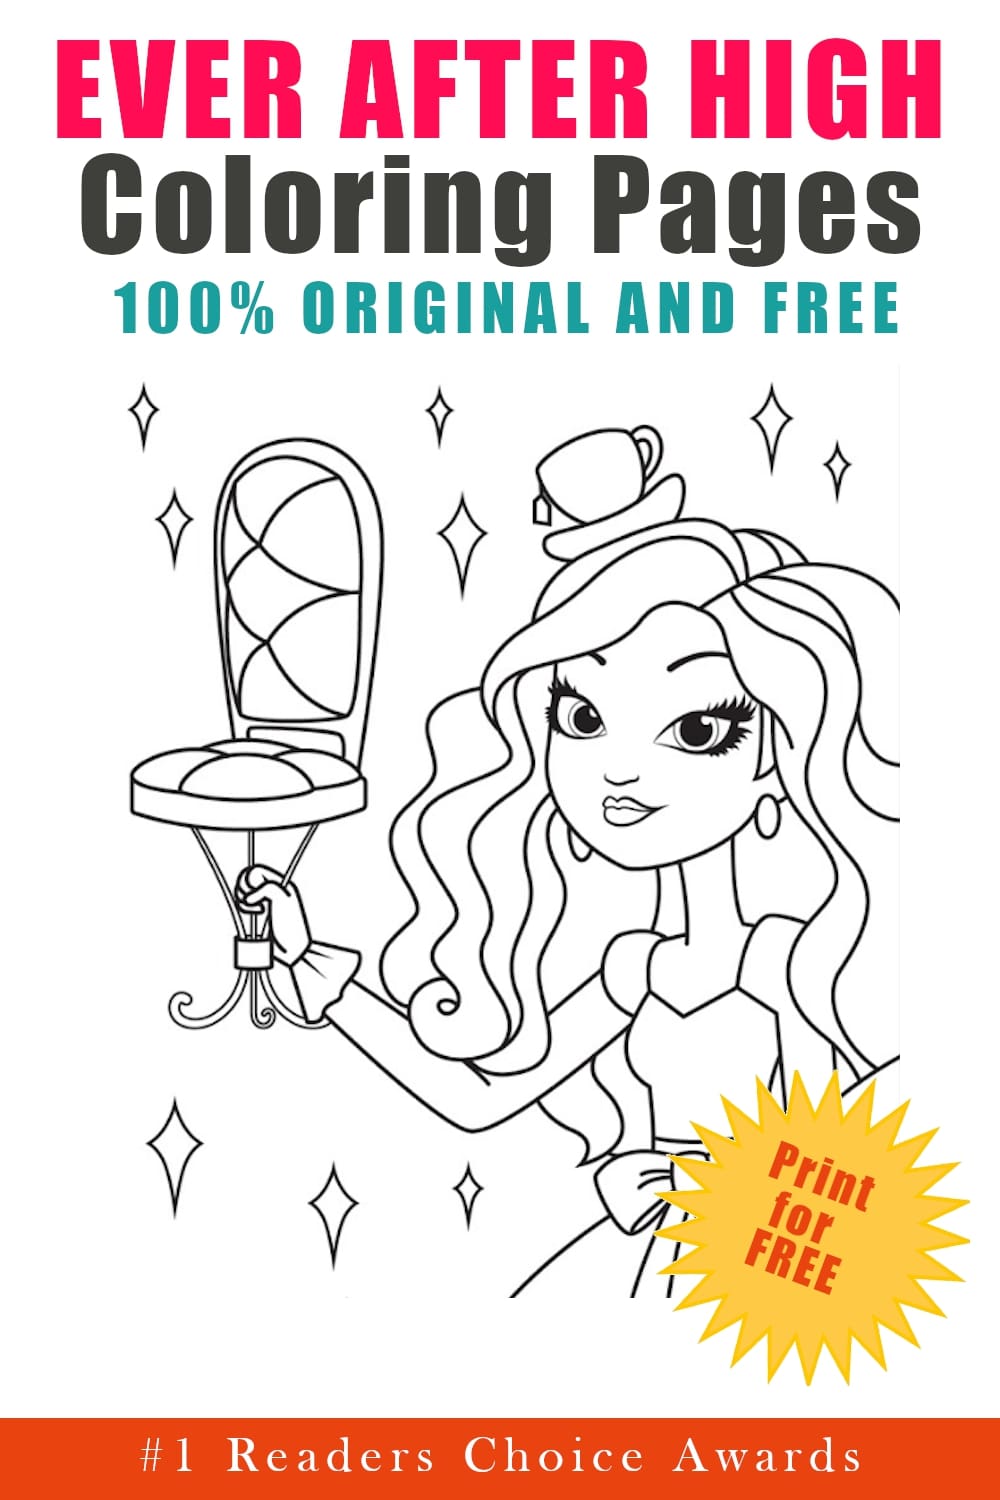 original and free ever after high coloring pages